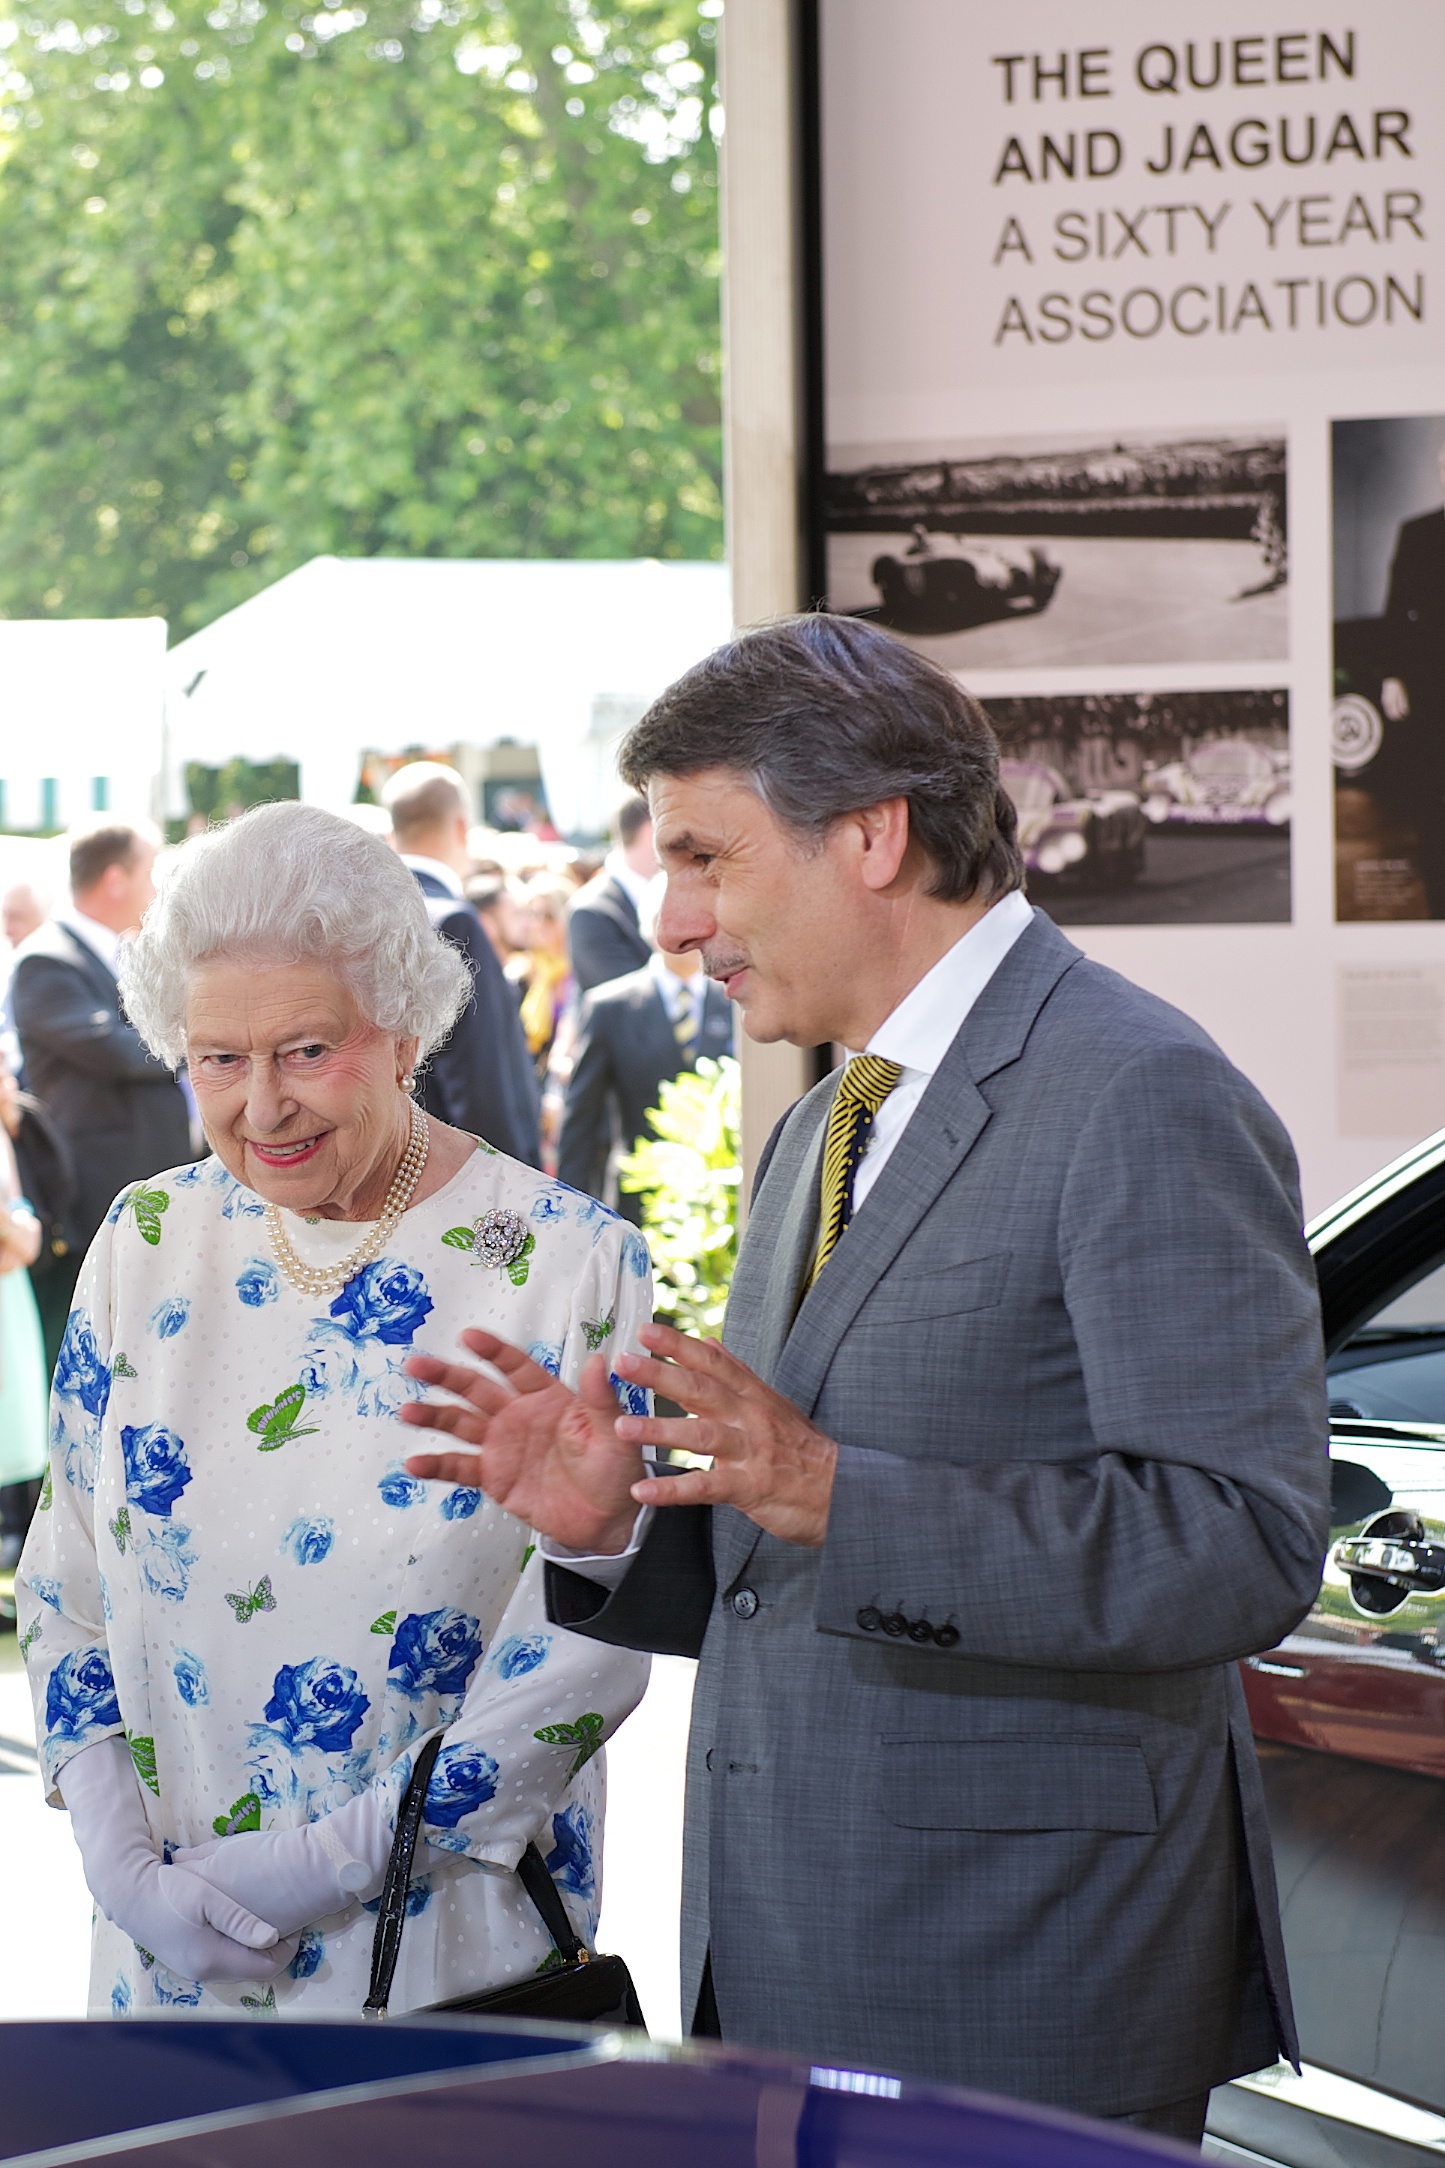 Her Majesty Queen Elizabeth II and Ralf Speth attend the Jaguar Land Rover Pavillion at The Coronation Festival at Buckingham Palace, London, 11th July 2013.